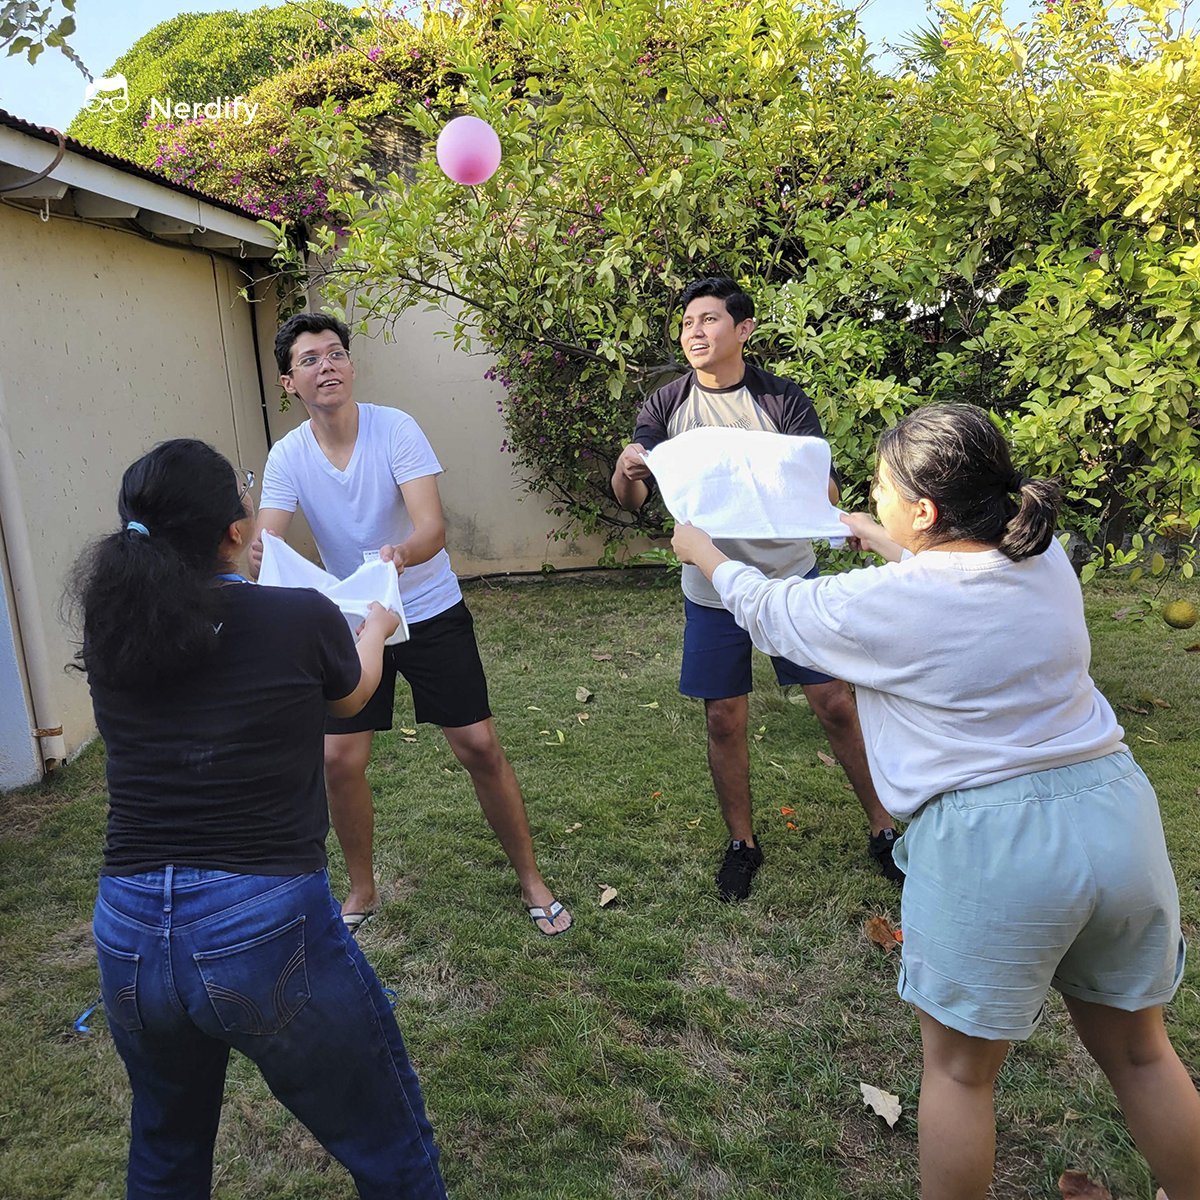 What a great day we had yesterday at Nerdify! 💼💦 We gathered as a team to strengthen our integration and communication, and there was no shortage of laughter and fun with an epic water balloon fight! 💧🎈

#GetNerdify #Nerdify #TeamNerdify #Programming #WebDevelopment